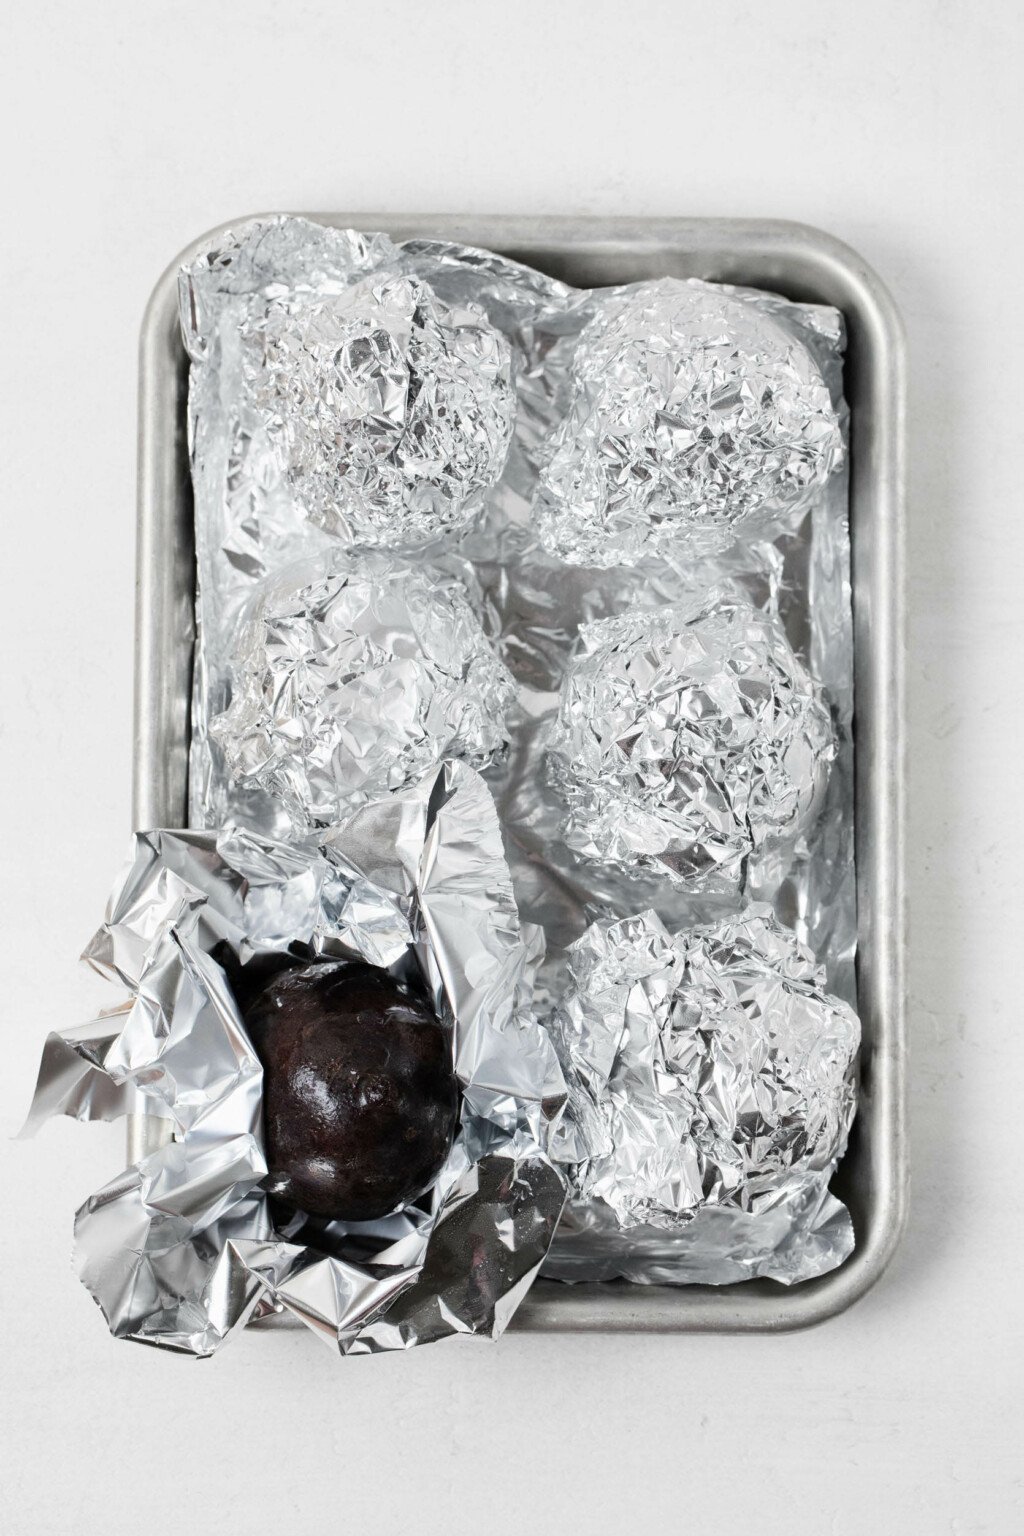 A small, aluminum baking tray contains foil-wrapped vegetables.